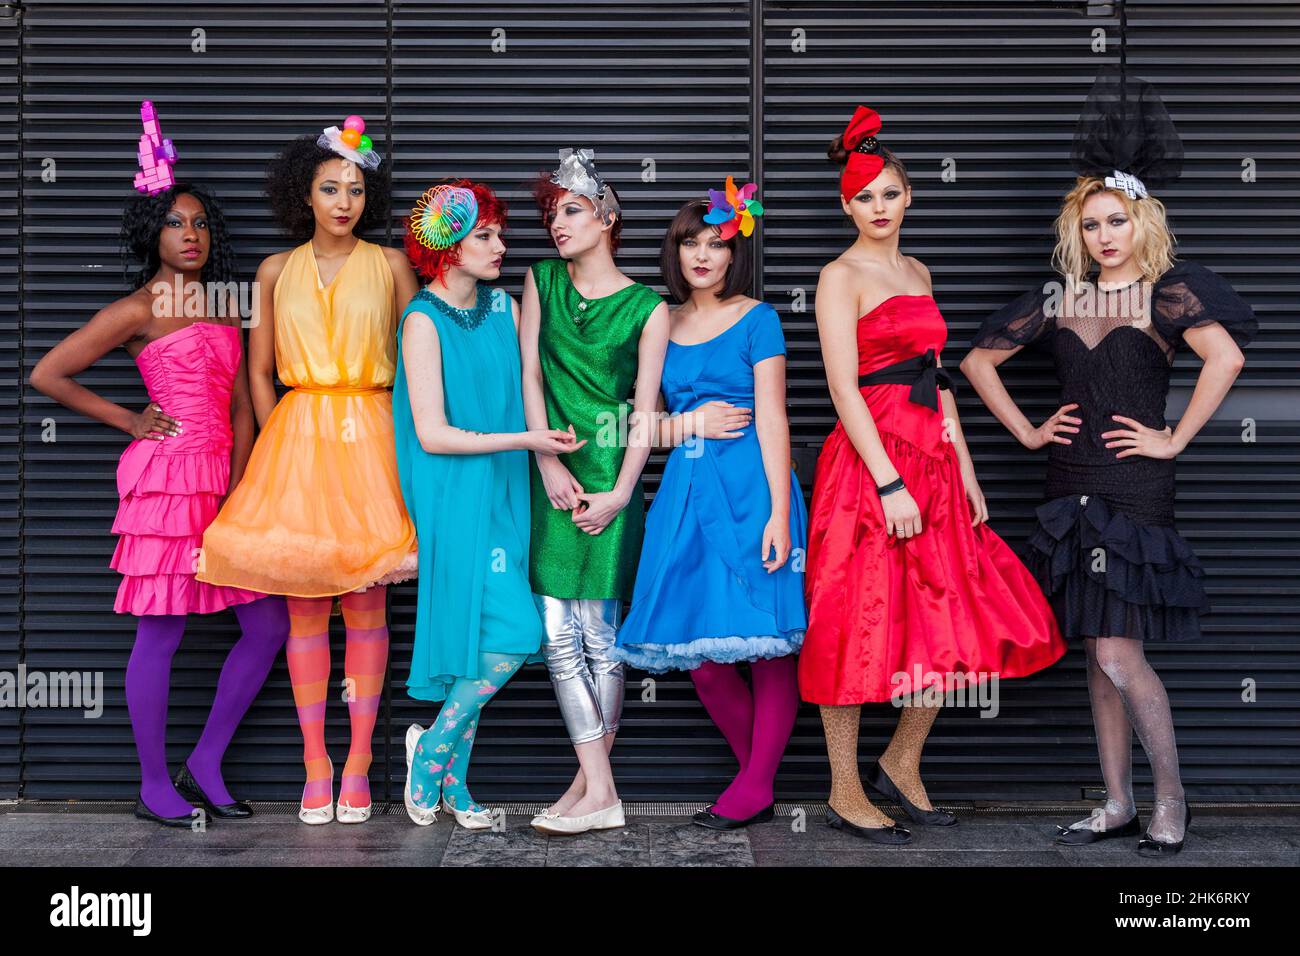 Group of models with colourful dresses, Alternative Fashion Week at Spitalfields Market, London Stock Photo